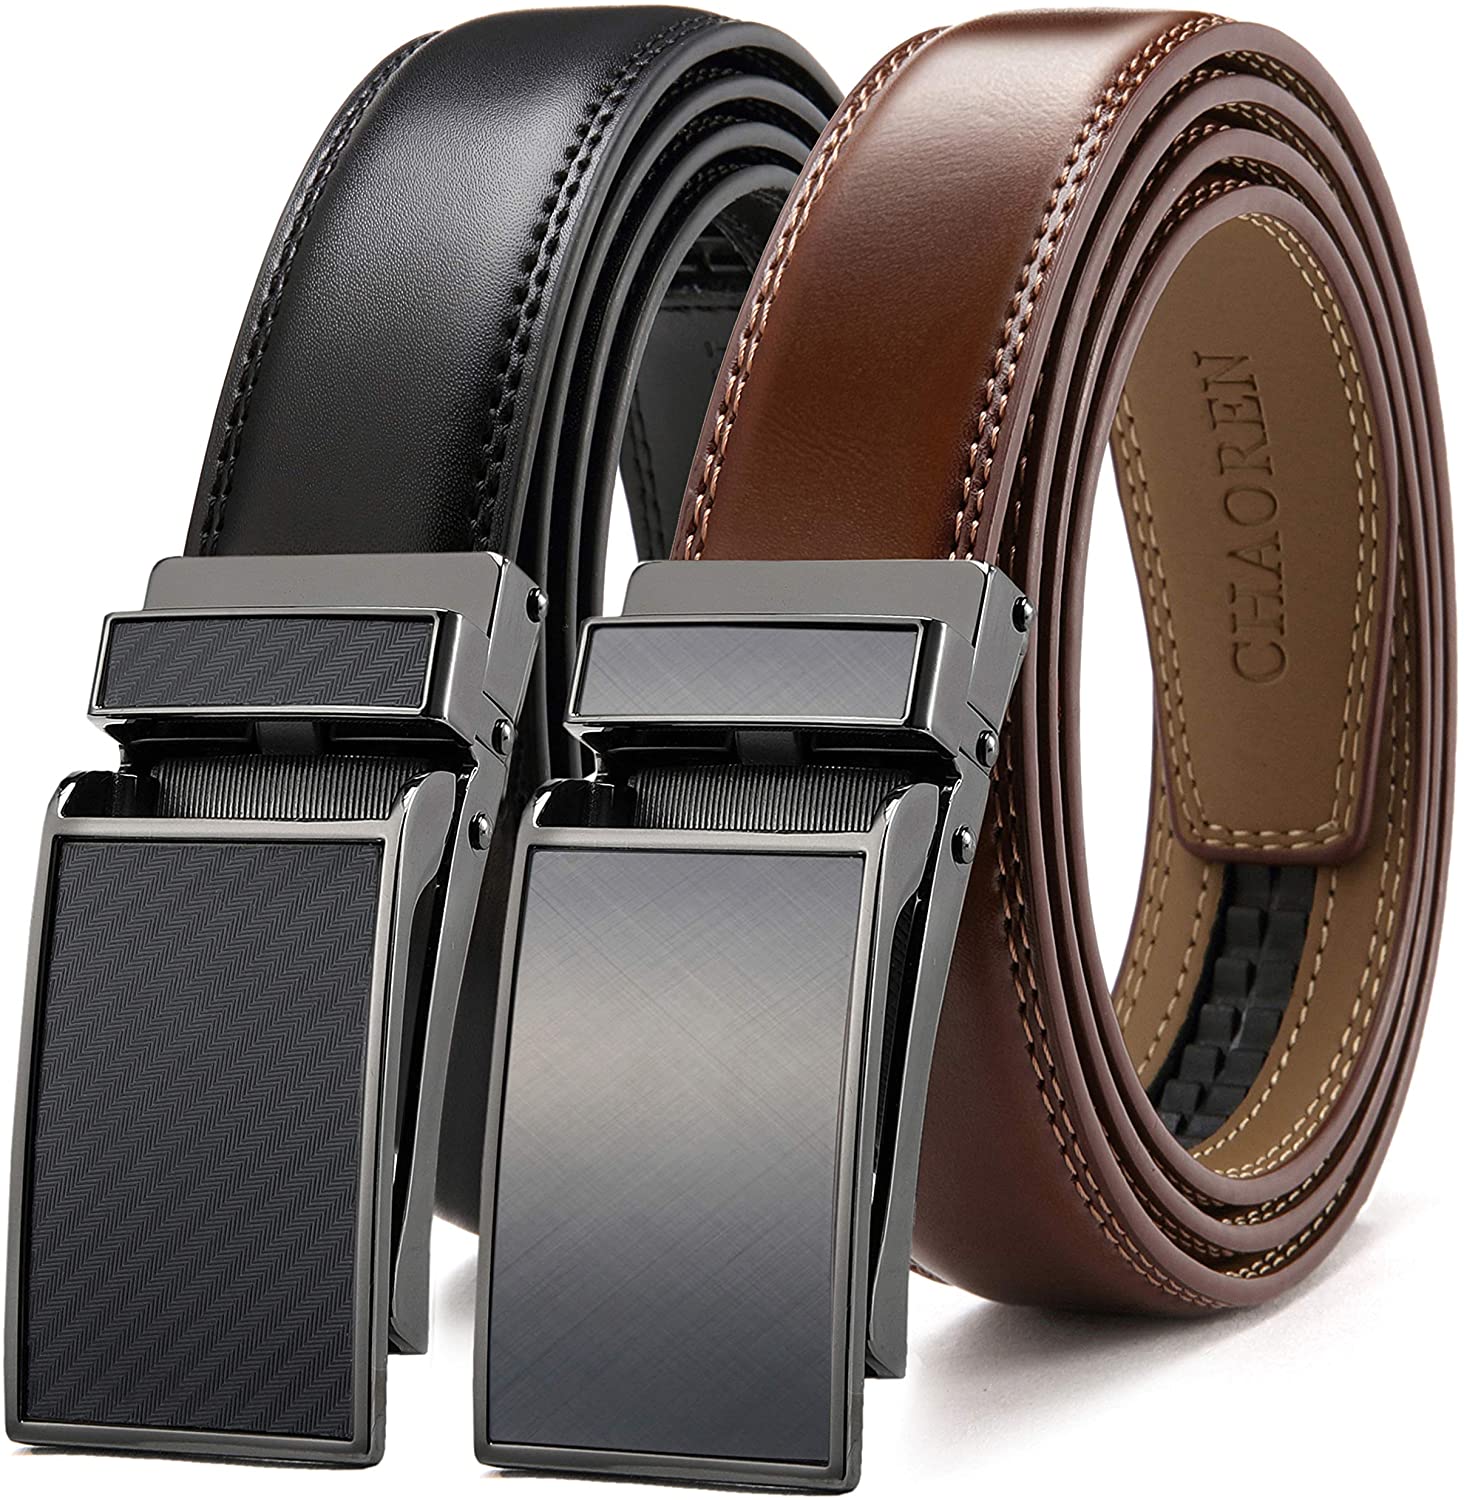 Chaoren Leather Ratchet Belt 2 Pack Dress with Click Sliding Buckle 1 3/8 in Gift Set Box Adjustable Trim to Fit 